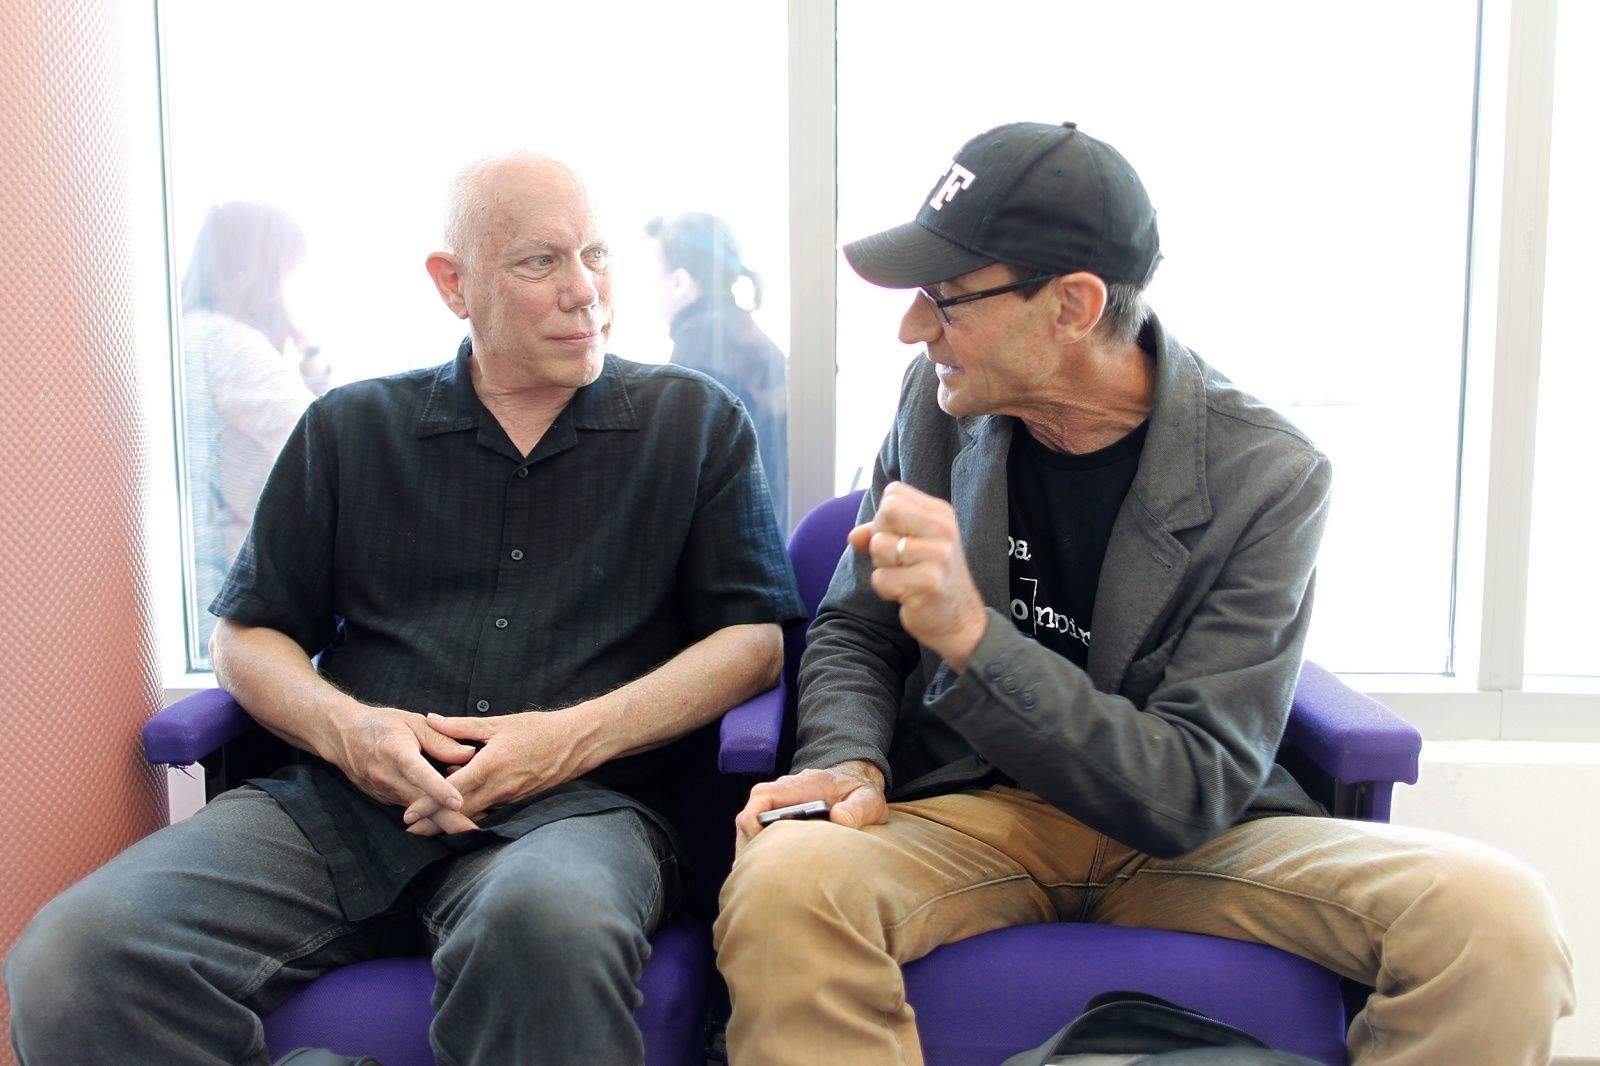 Bill Atkinson, left and Andrew Stone chat each other up at AltConf in San Francisco June 3, 2014. Photo: Jim Merithew/Cult of Mac